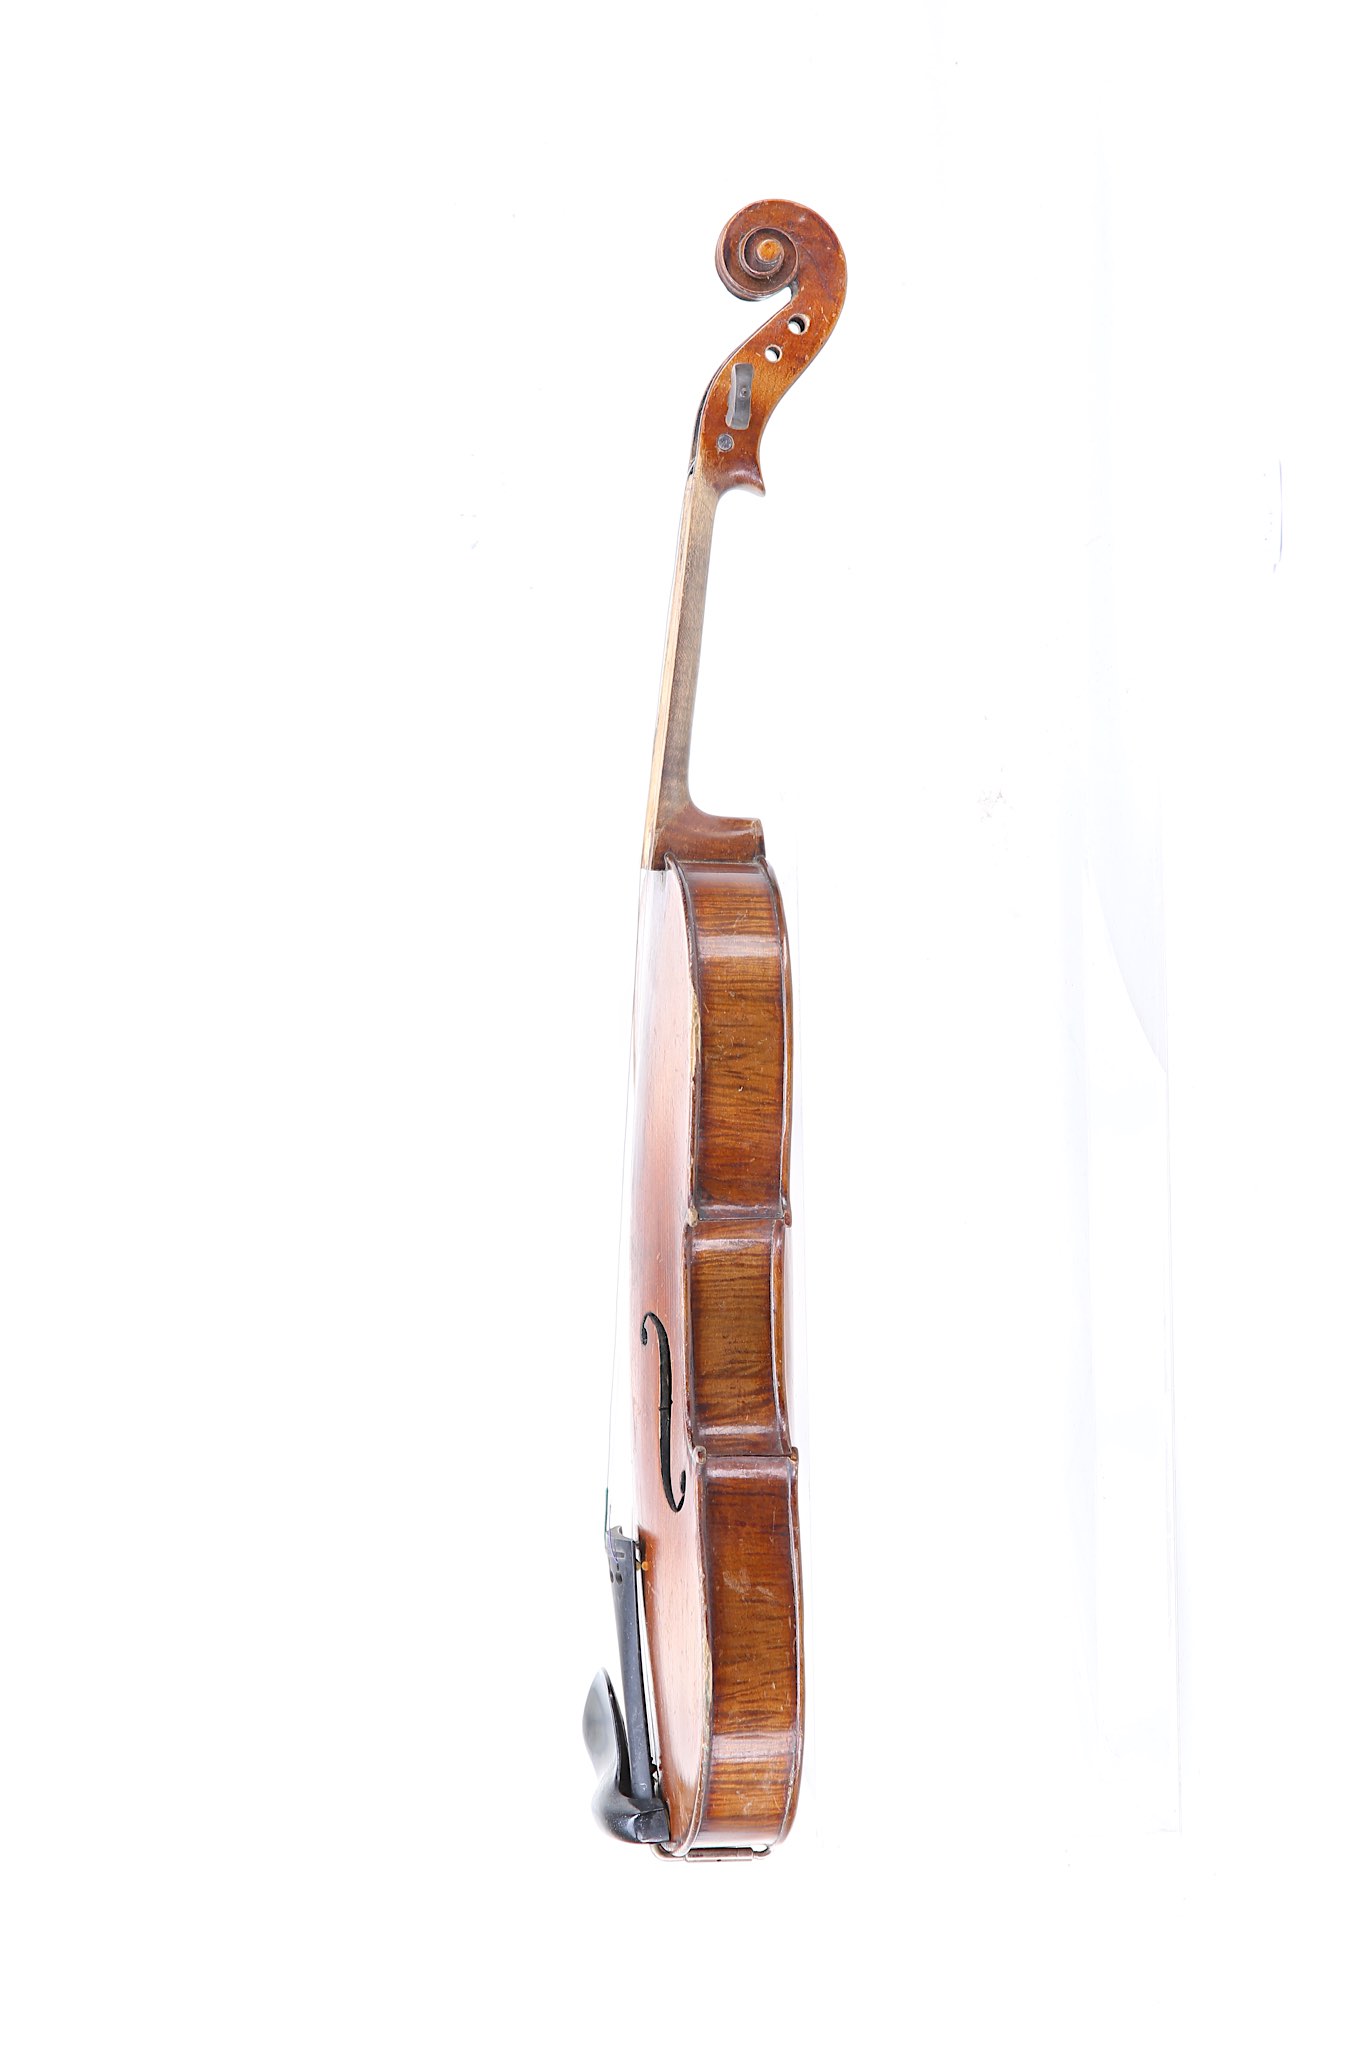 German violin. Early 20th century. No labelled. Two piece back ,medium figure flame maple wood, - Image 5 of 8